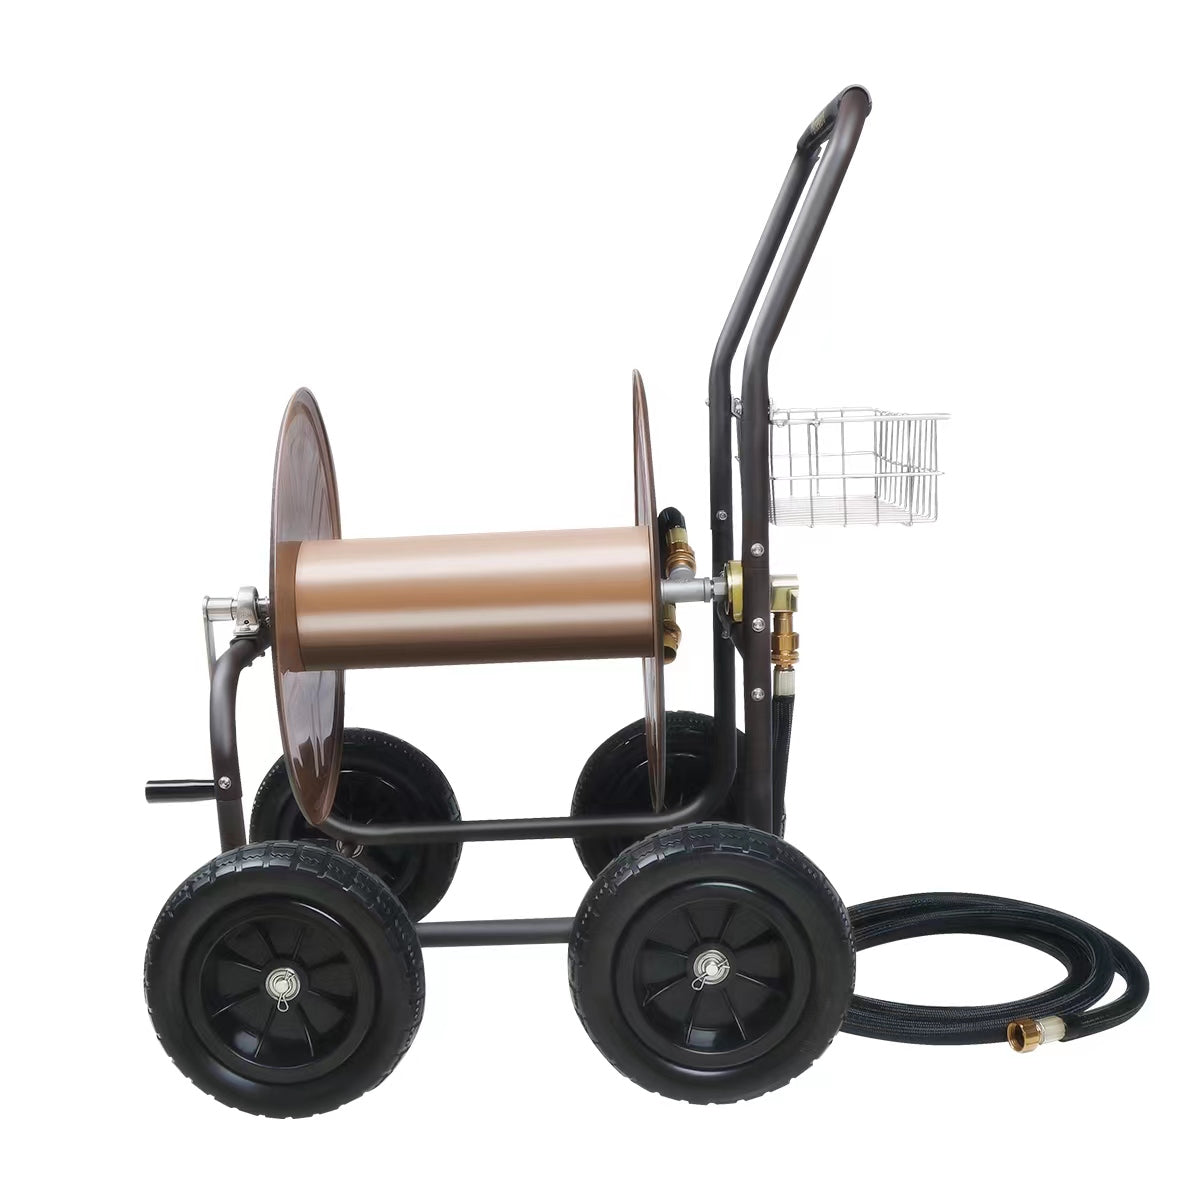 Persevere Stainless Steel Garden Hose Reel Cart Heavy Duty Portable Hose Holder with Basket 4 Solid Wheels Water Hose Storage Cart for Watering Garden/ Yard/ Lawn/ Farm（wood grain color）